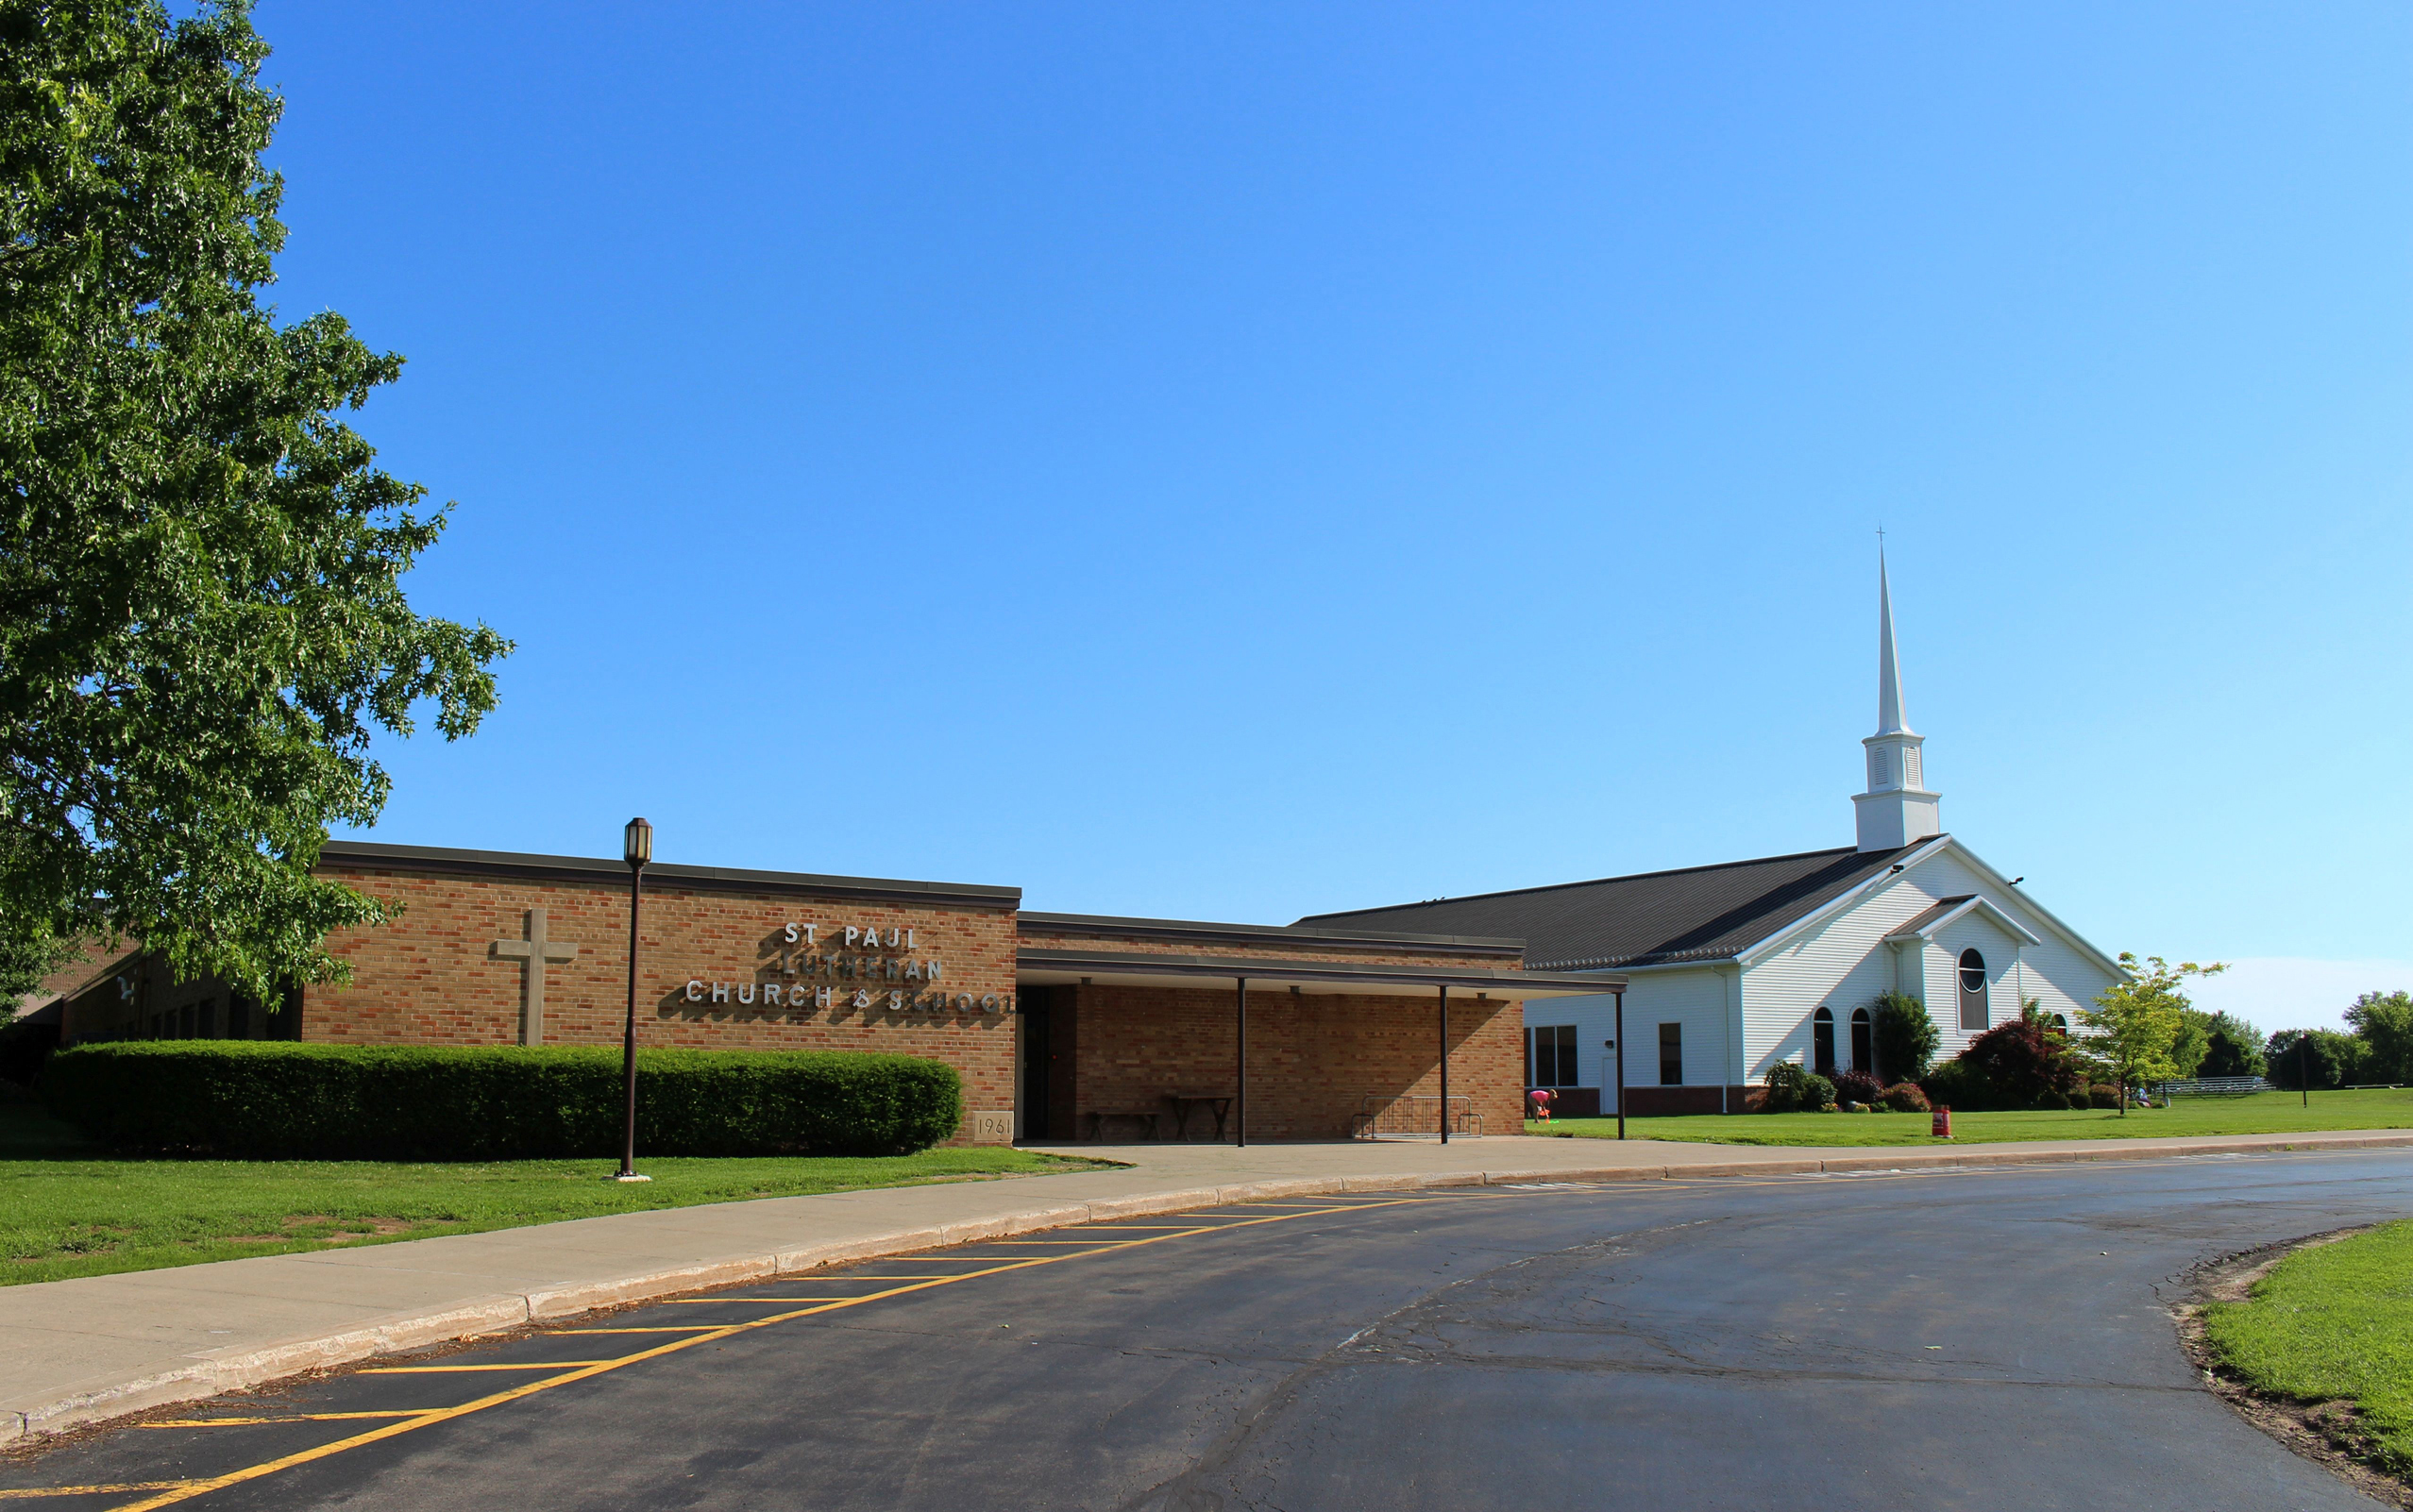 community-invited-to-60th-anniversary-live-auction-at-st-paul-lutheran